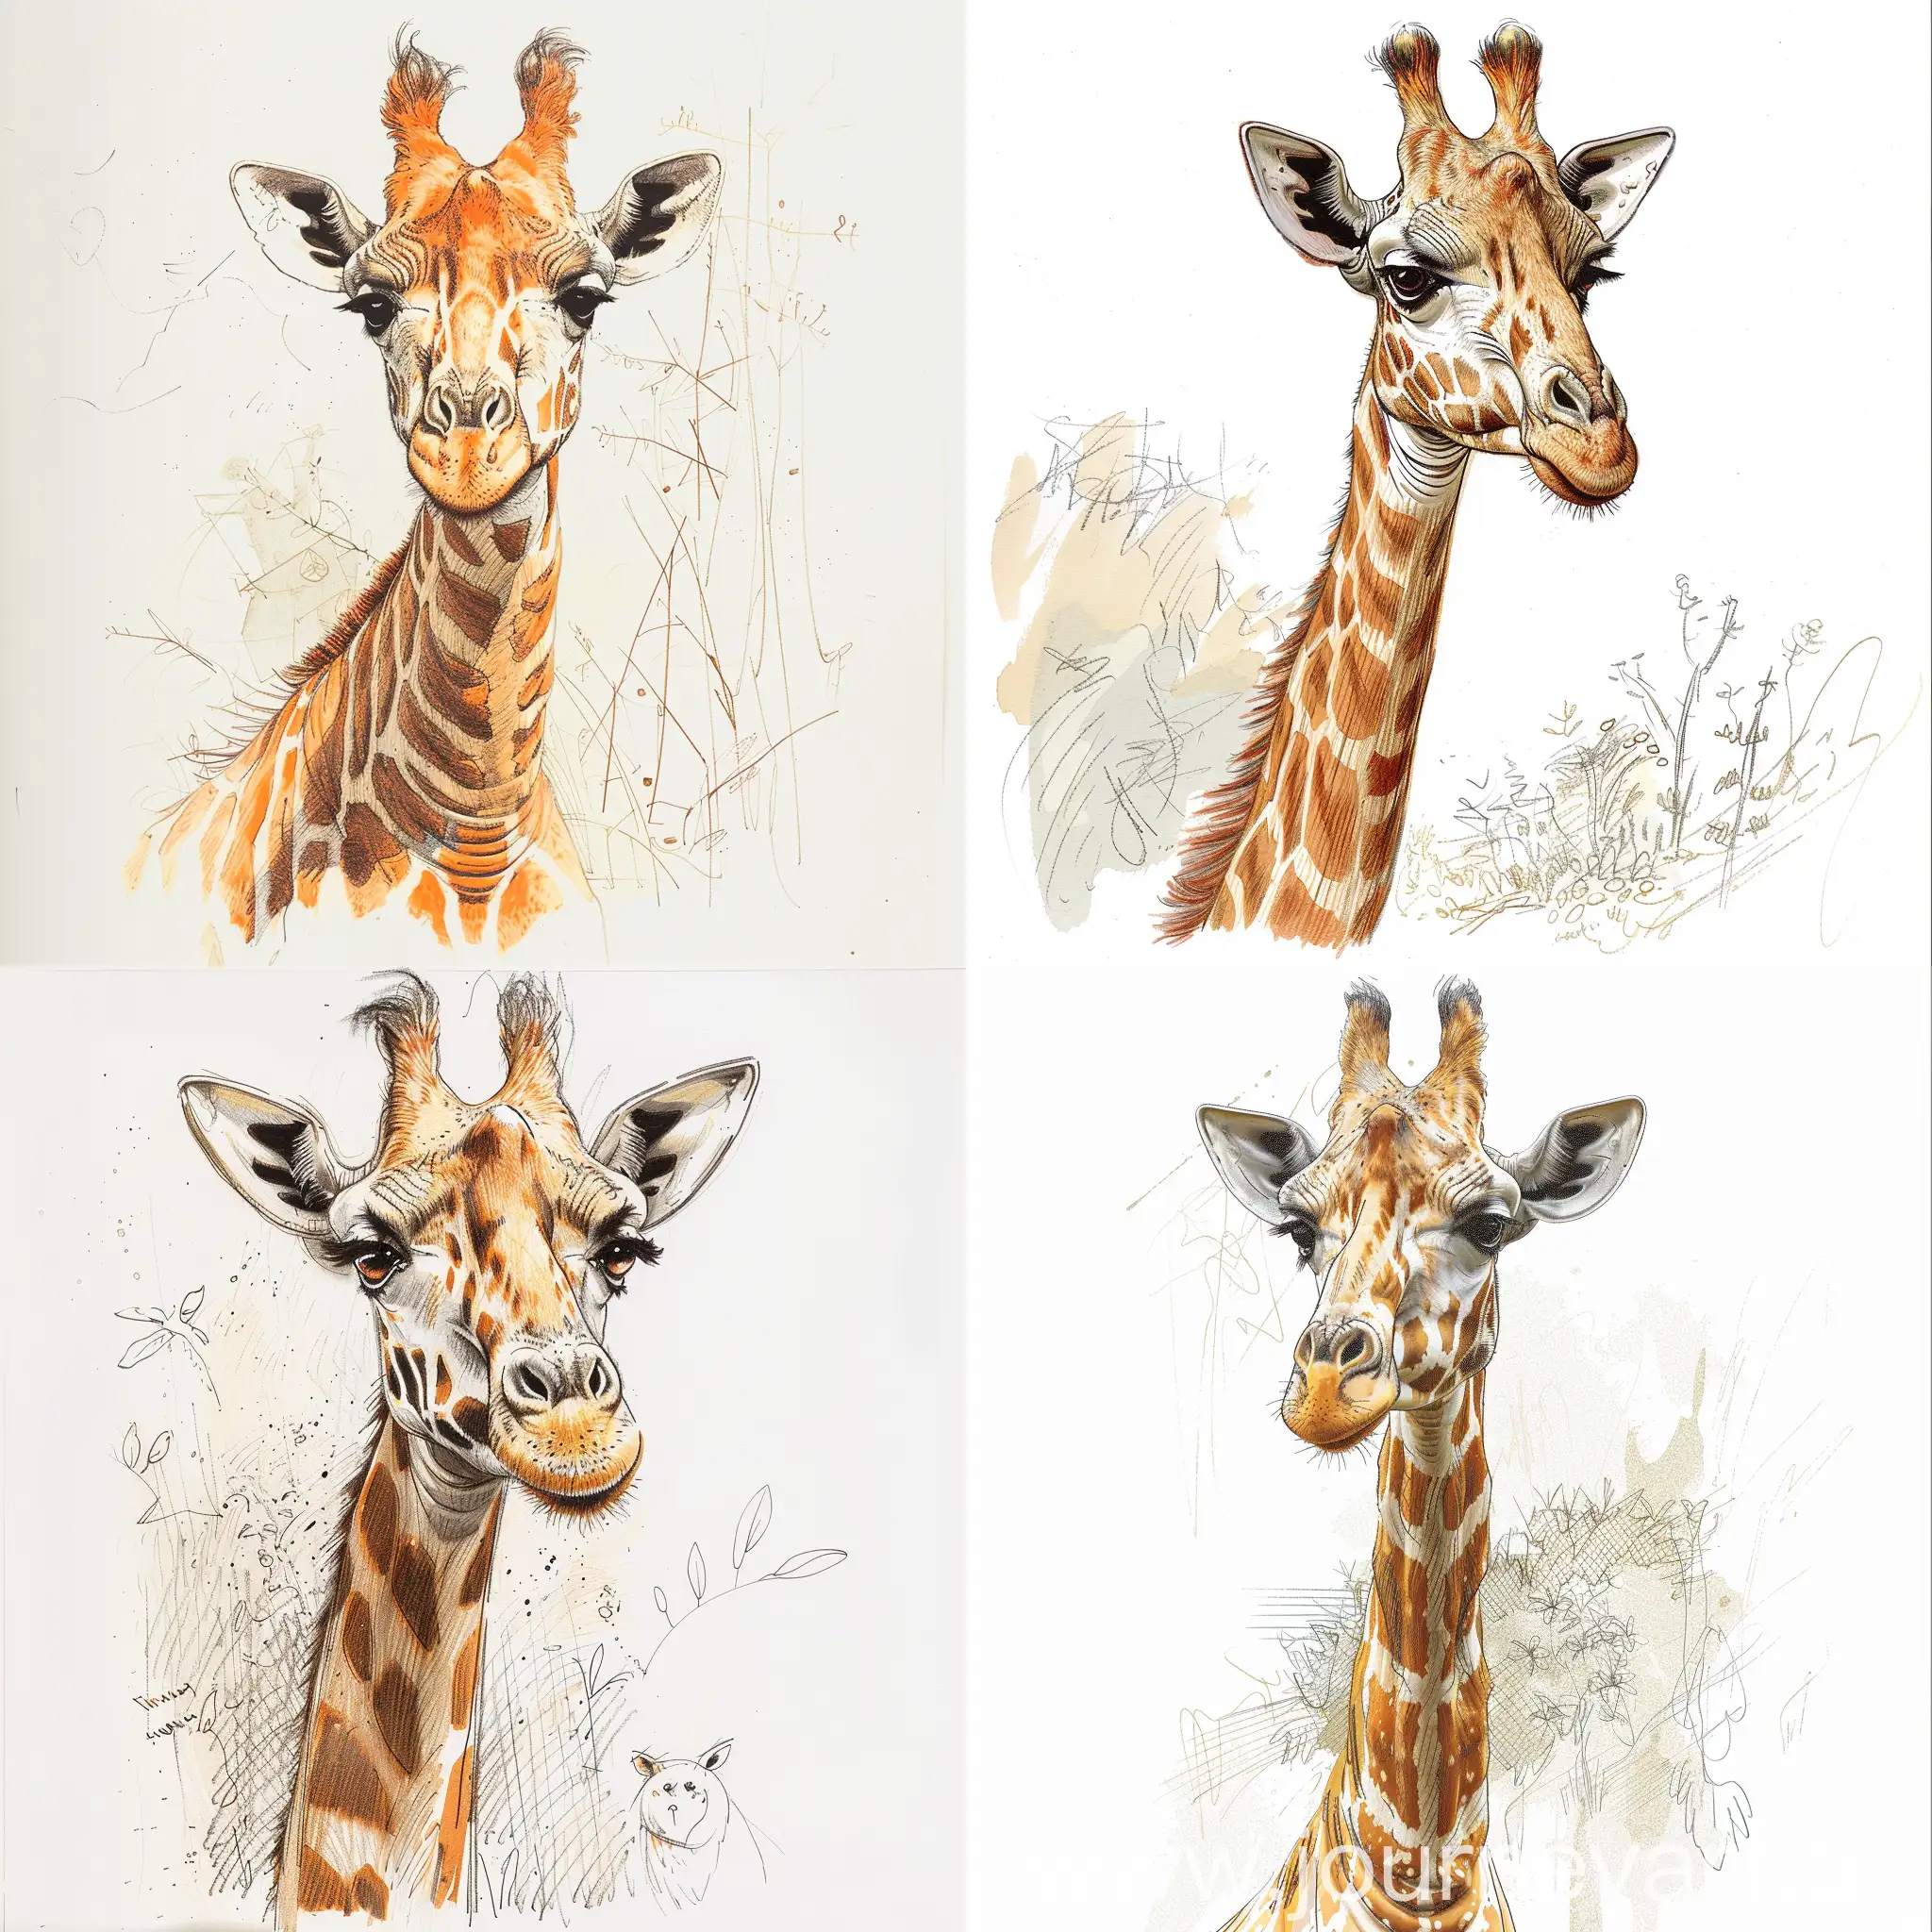 Envision an Giraffe illustrated in the style of an early 1900s children's book white background, where every stroke and shading mark is visible, adding depth and texture. The animal is drawn with a blend of realism and whimsical charm, its features exaggerated to capture a child-like wonder. The creature's expression is gentle and filled with personality, inviting stories and imagination. Shading is done with delicate pencil marks, highlighting the form and contours. The animal is the central figure against a clean white background, surrounded by a few sketched elements of its natural habitat to give context, yet keeping the focus on the animal itself. The overall artwork radiates the warmth and nostalgia of a time-honored children's tale